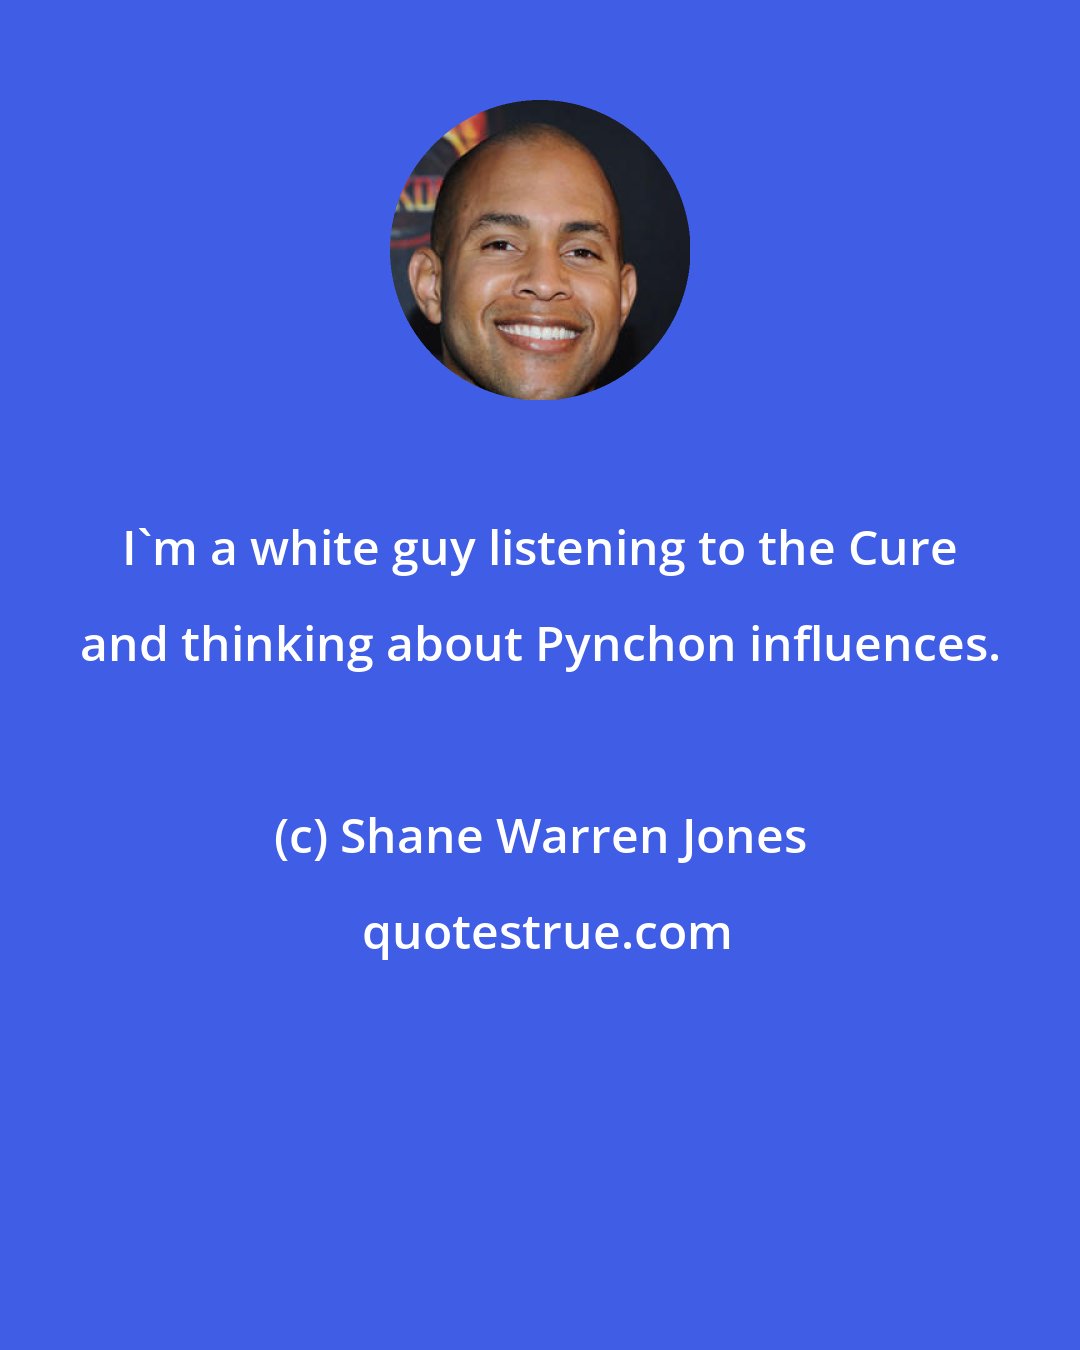 Shane Warren Jones: I'm a white guy listening to the Cure and thinking about Pynchon influences.